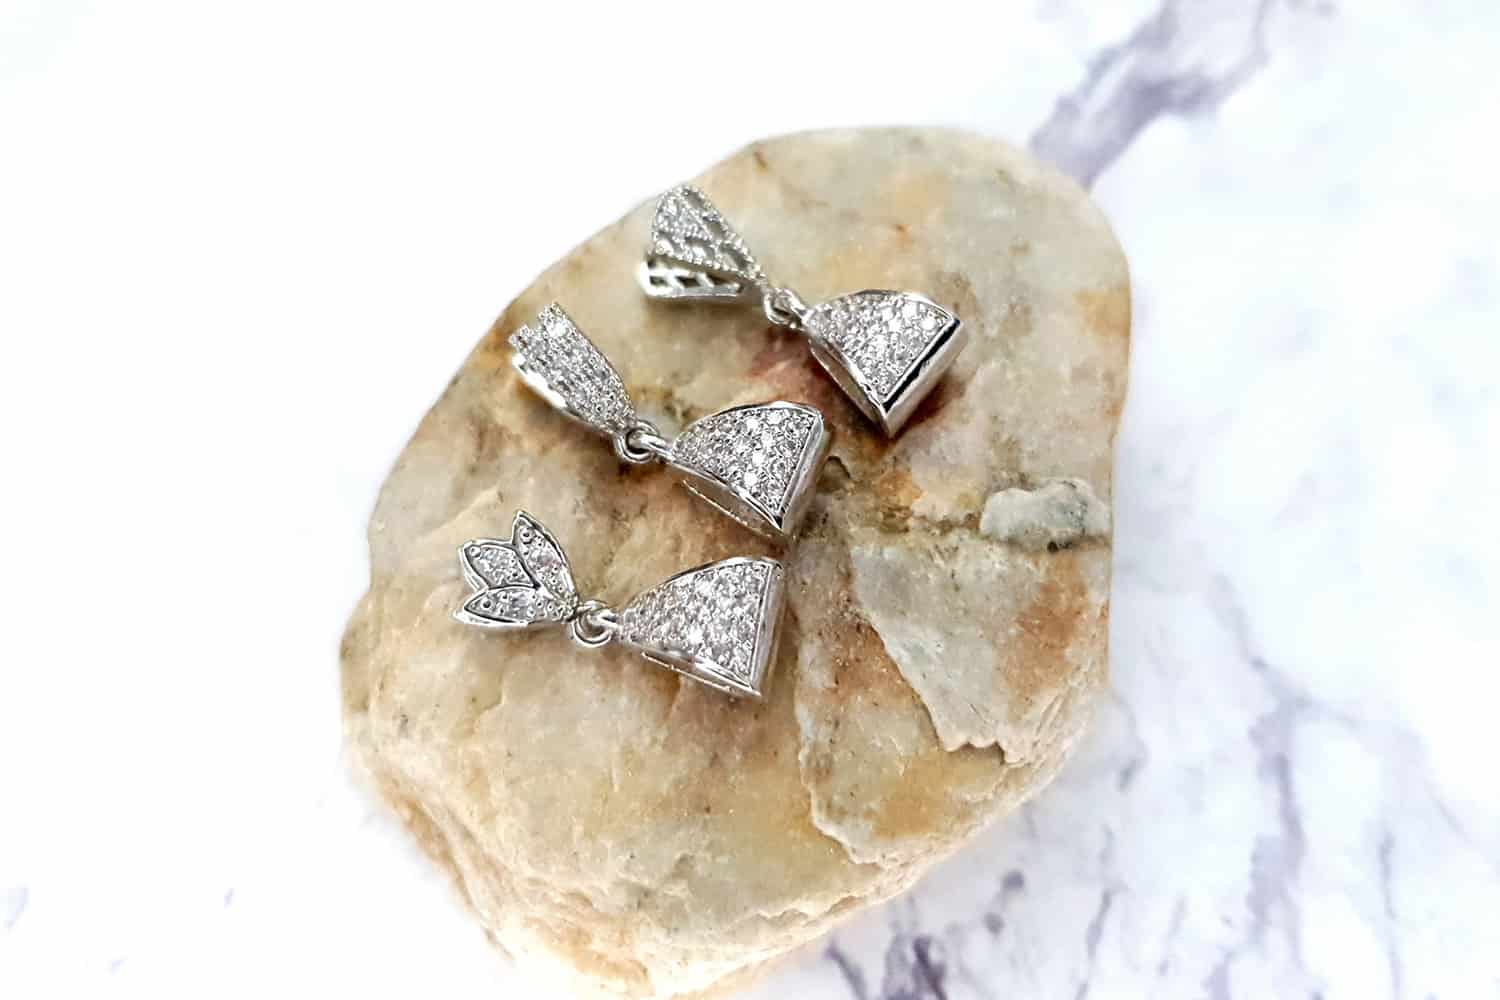 3 high quality silver crystals pendant pinch bail (25364)